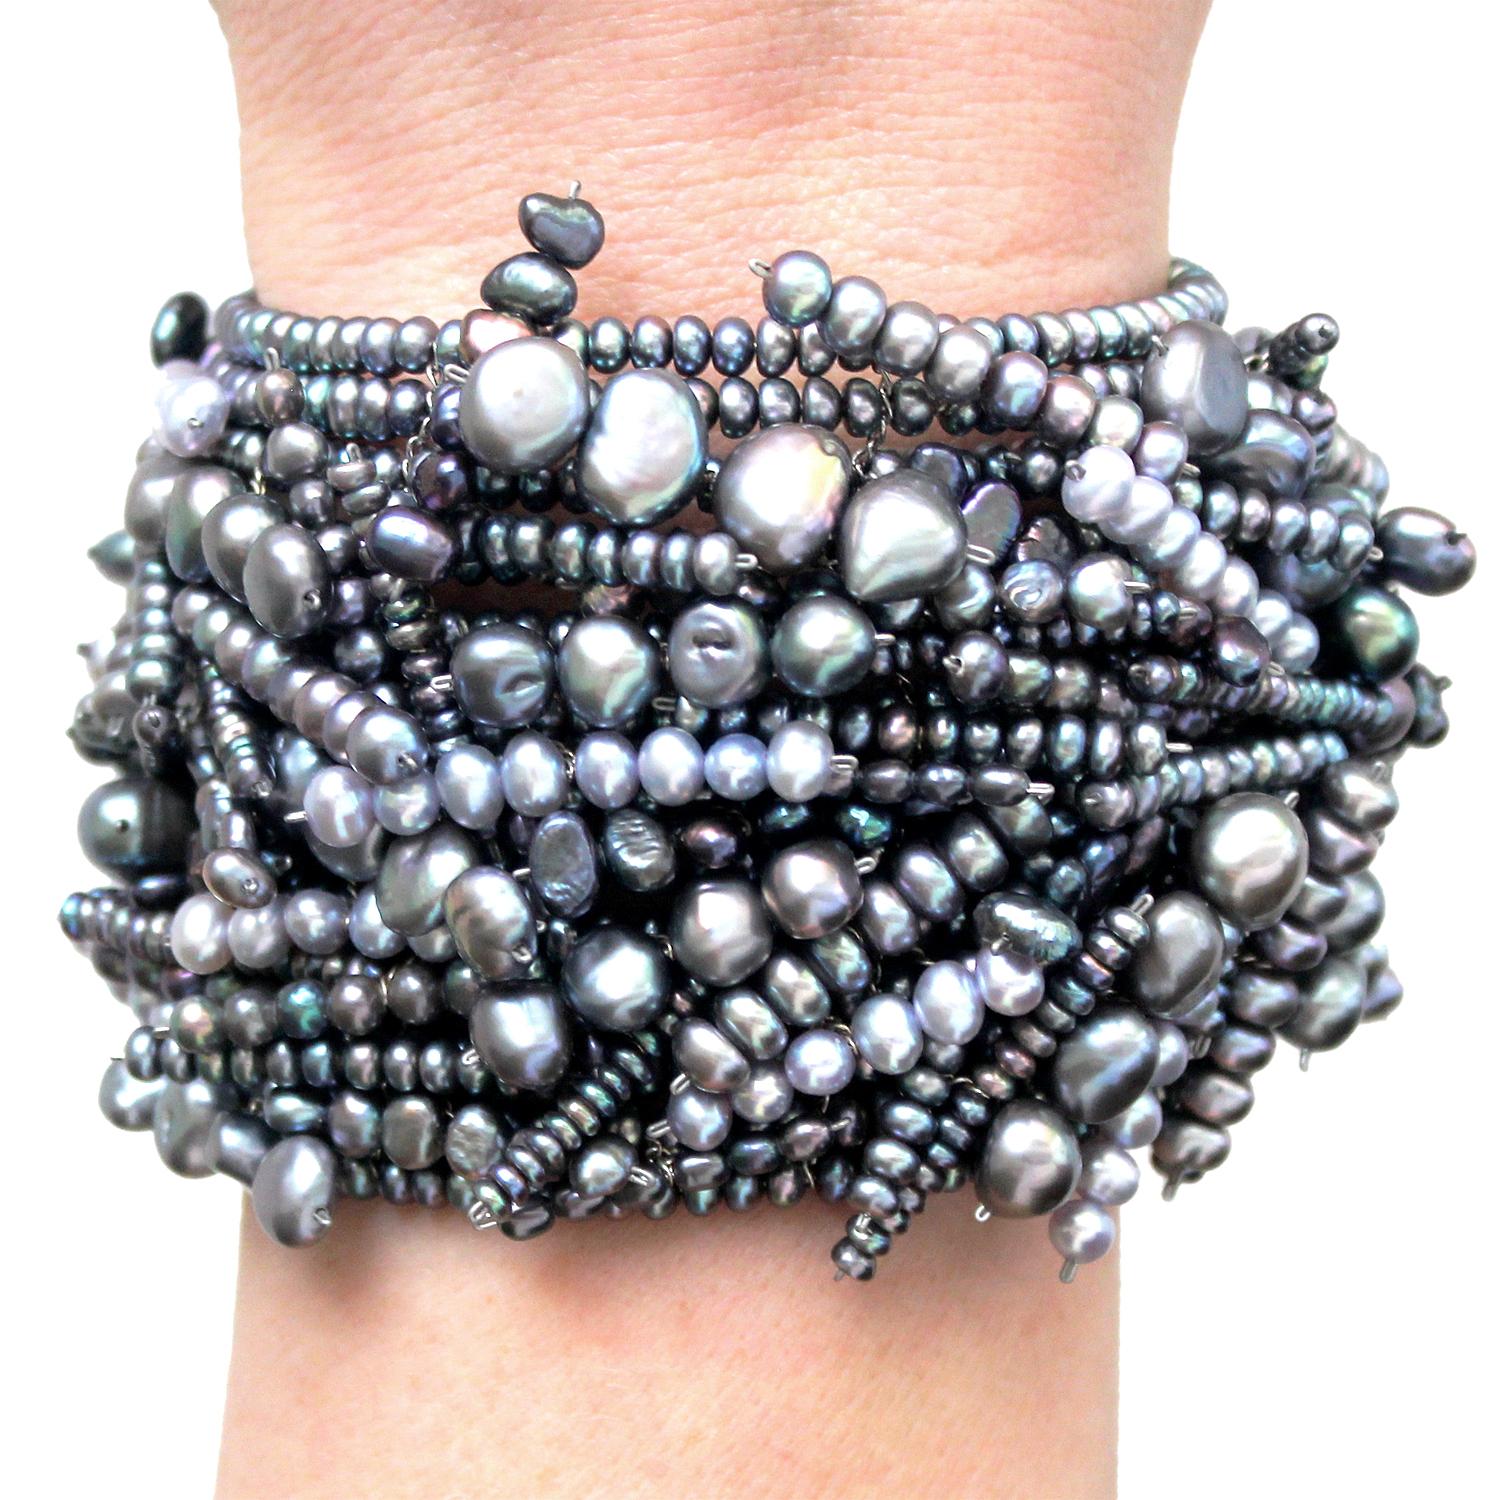 Chaos Cuff Bracelet handcrafted by jewelry artist Estyn Hulbert with thirteen rows of assorted blue and silver colored pearls strung on an yellow gold filled chain. Very flexible, and easily stretches to open and close comfortably around the wrist. 